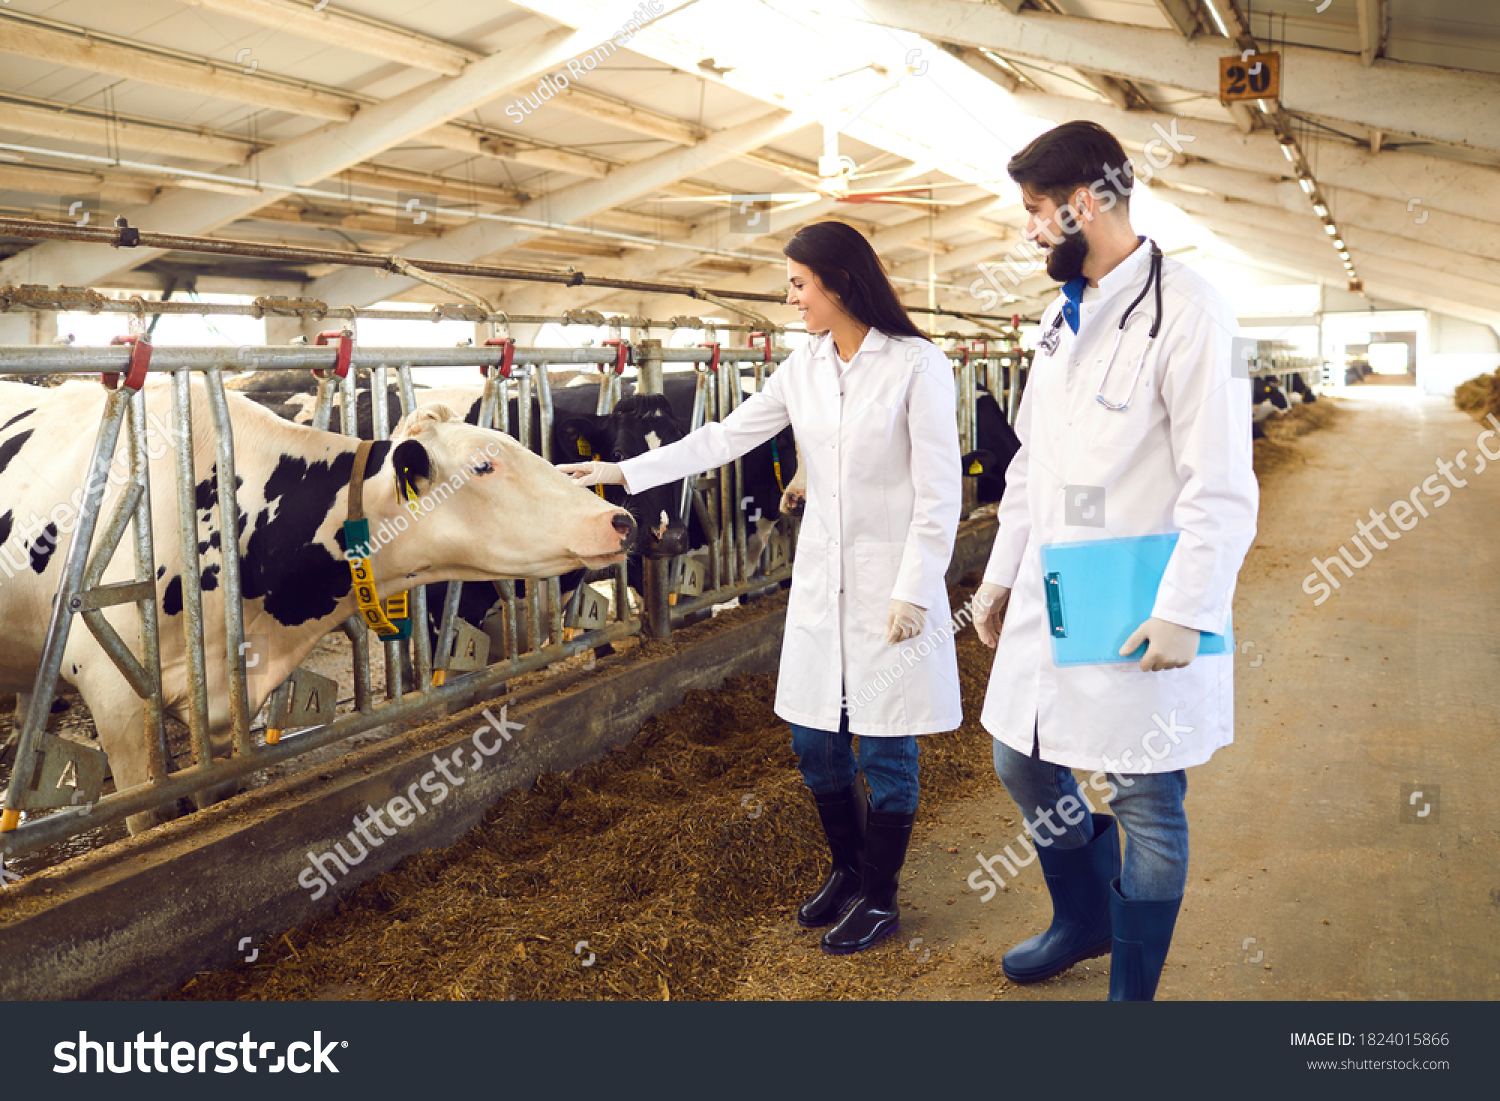 Two young livestock vets in lab coats checking on cows in cowshed on dairy farm, female doctor stroking cow tenderly. Regular veterinary monitoring, medical care and cattle breeding concepts #1824015866